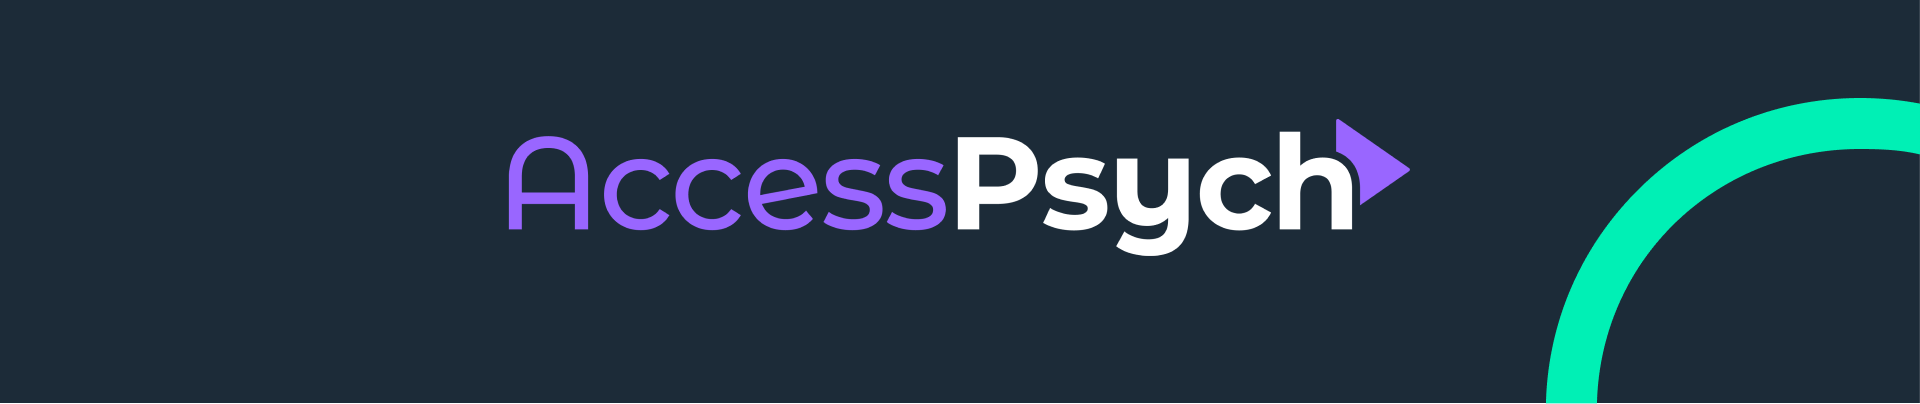 Access Psych logo and branding, designed by MOO Marketing & Design branding agency in Melbourne